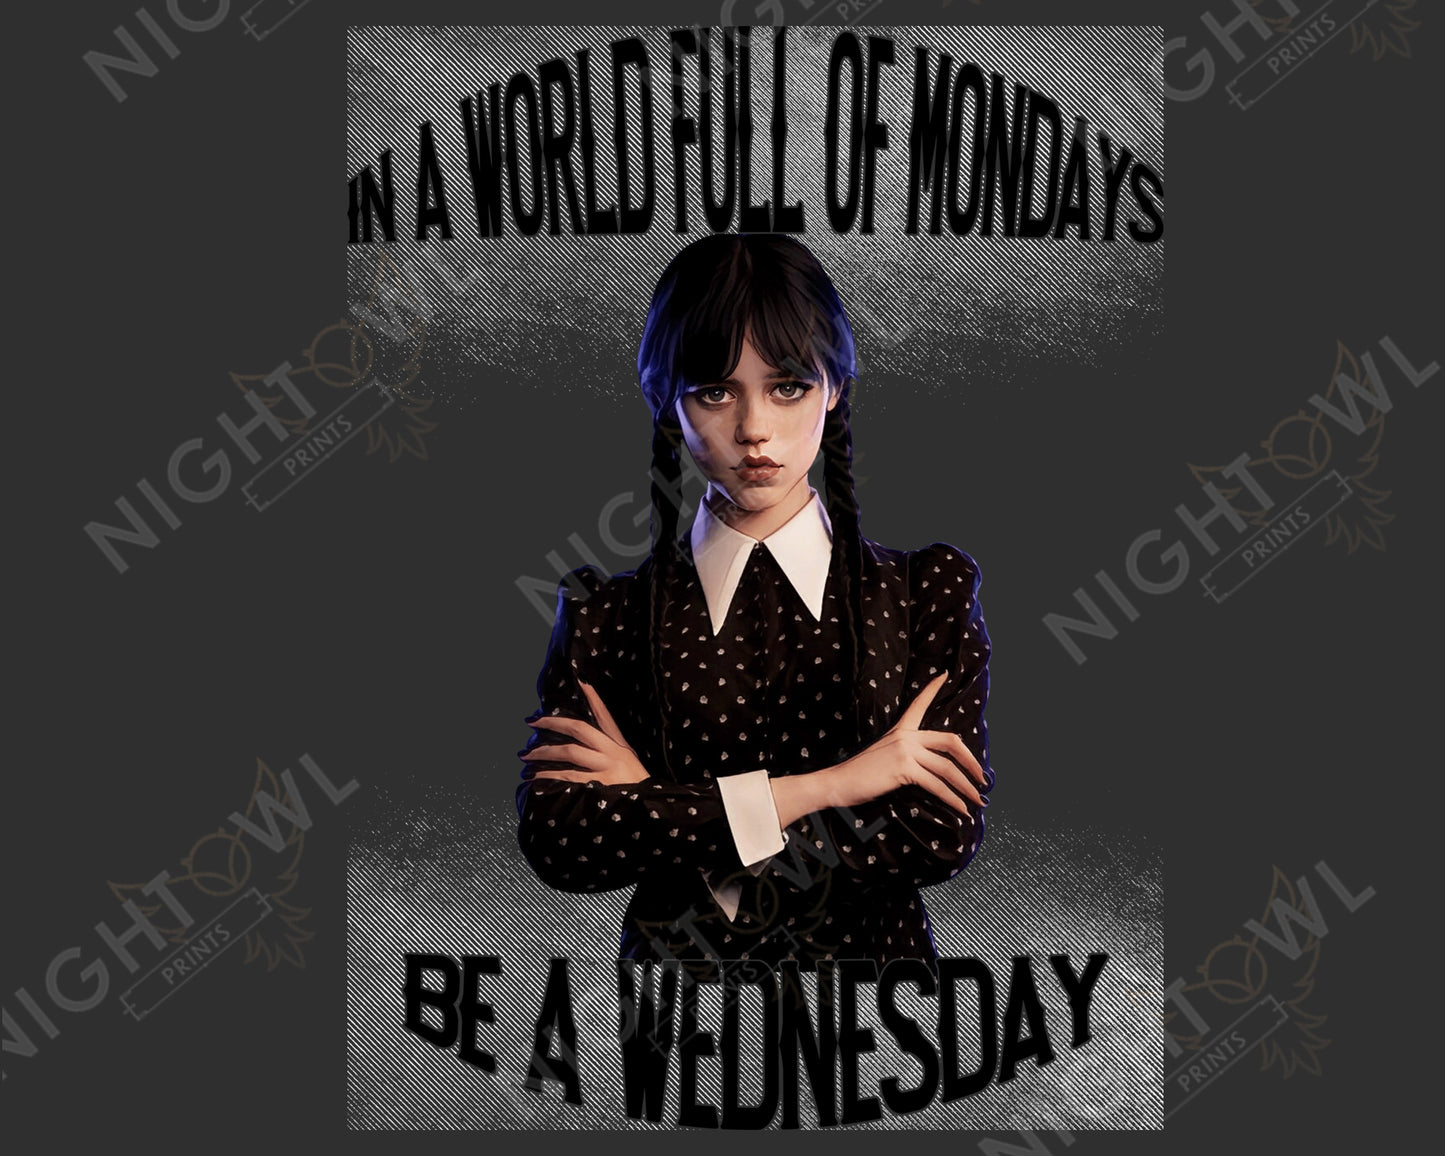 Digital Download file PNG. Be a Wednesday in Monday 300 DPI.  Print ready file.